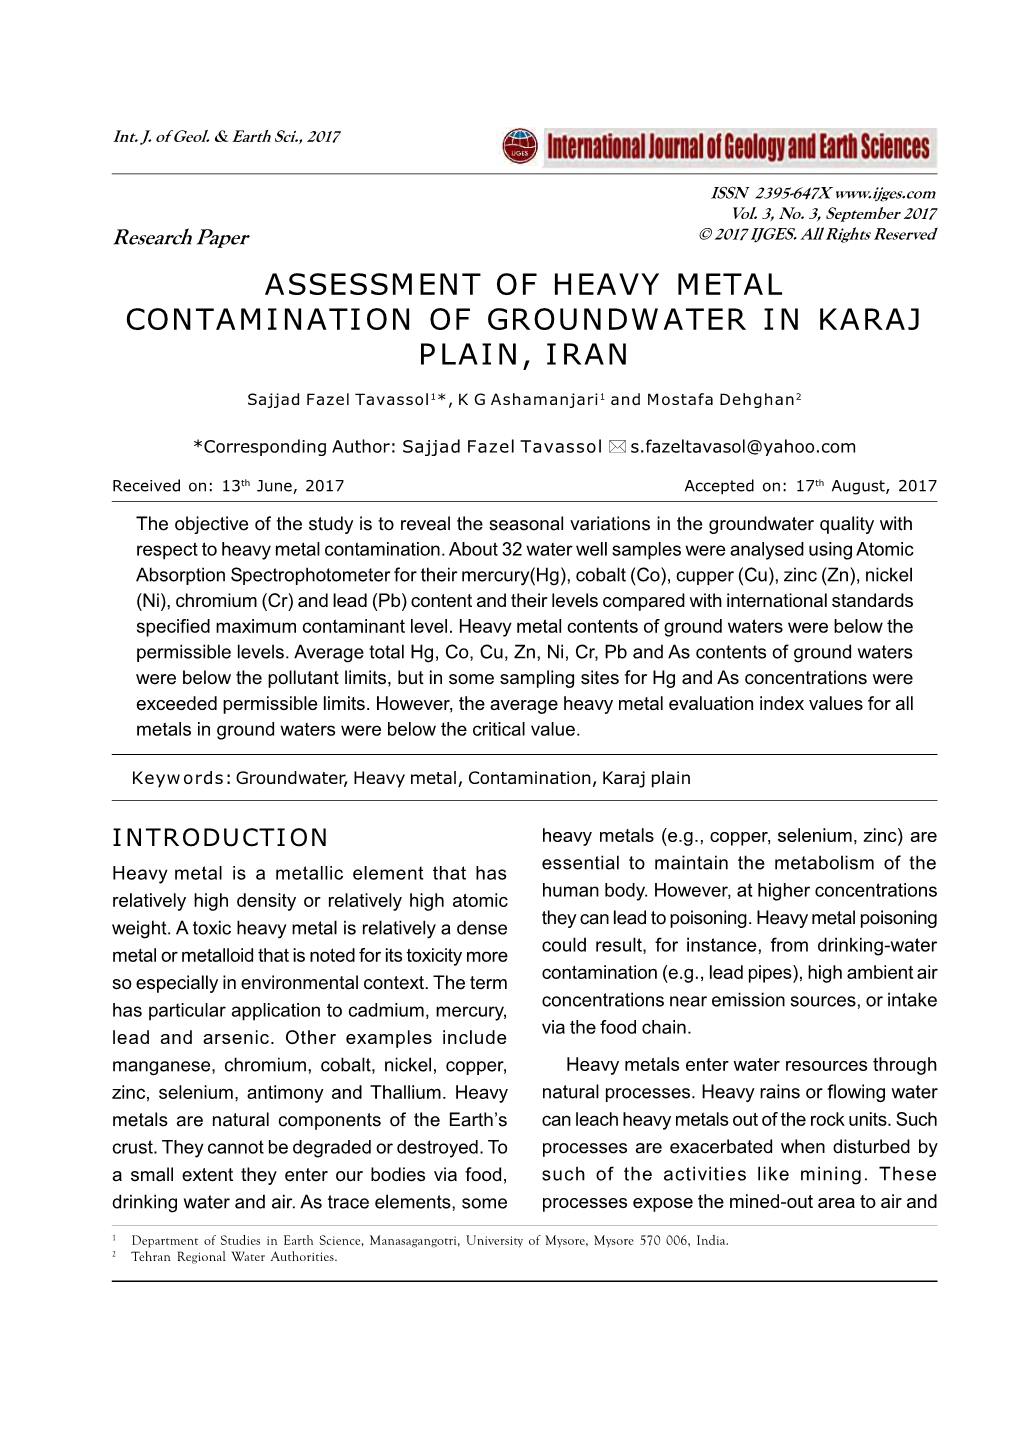 Assessment of Heavy Metal Contamination of Groundwater in Karaj Plain, Iran